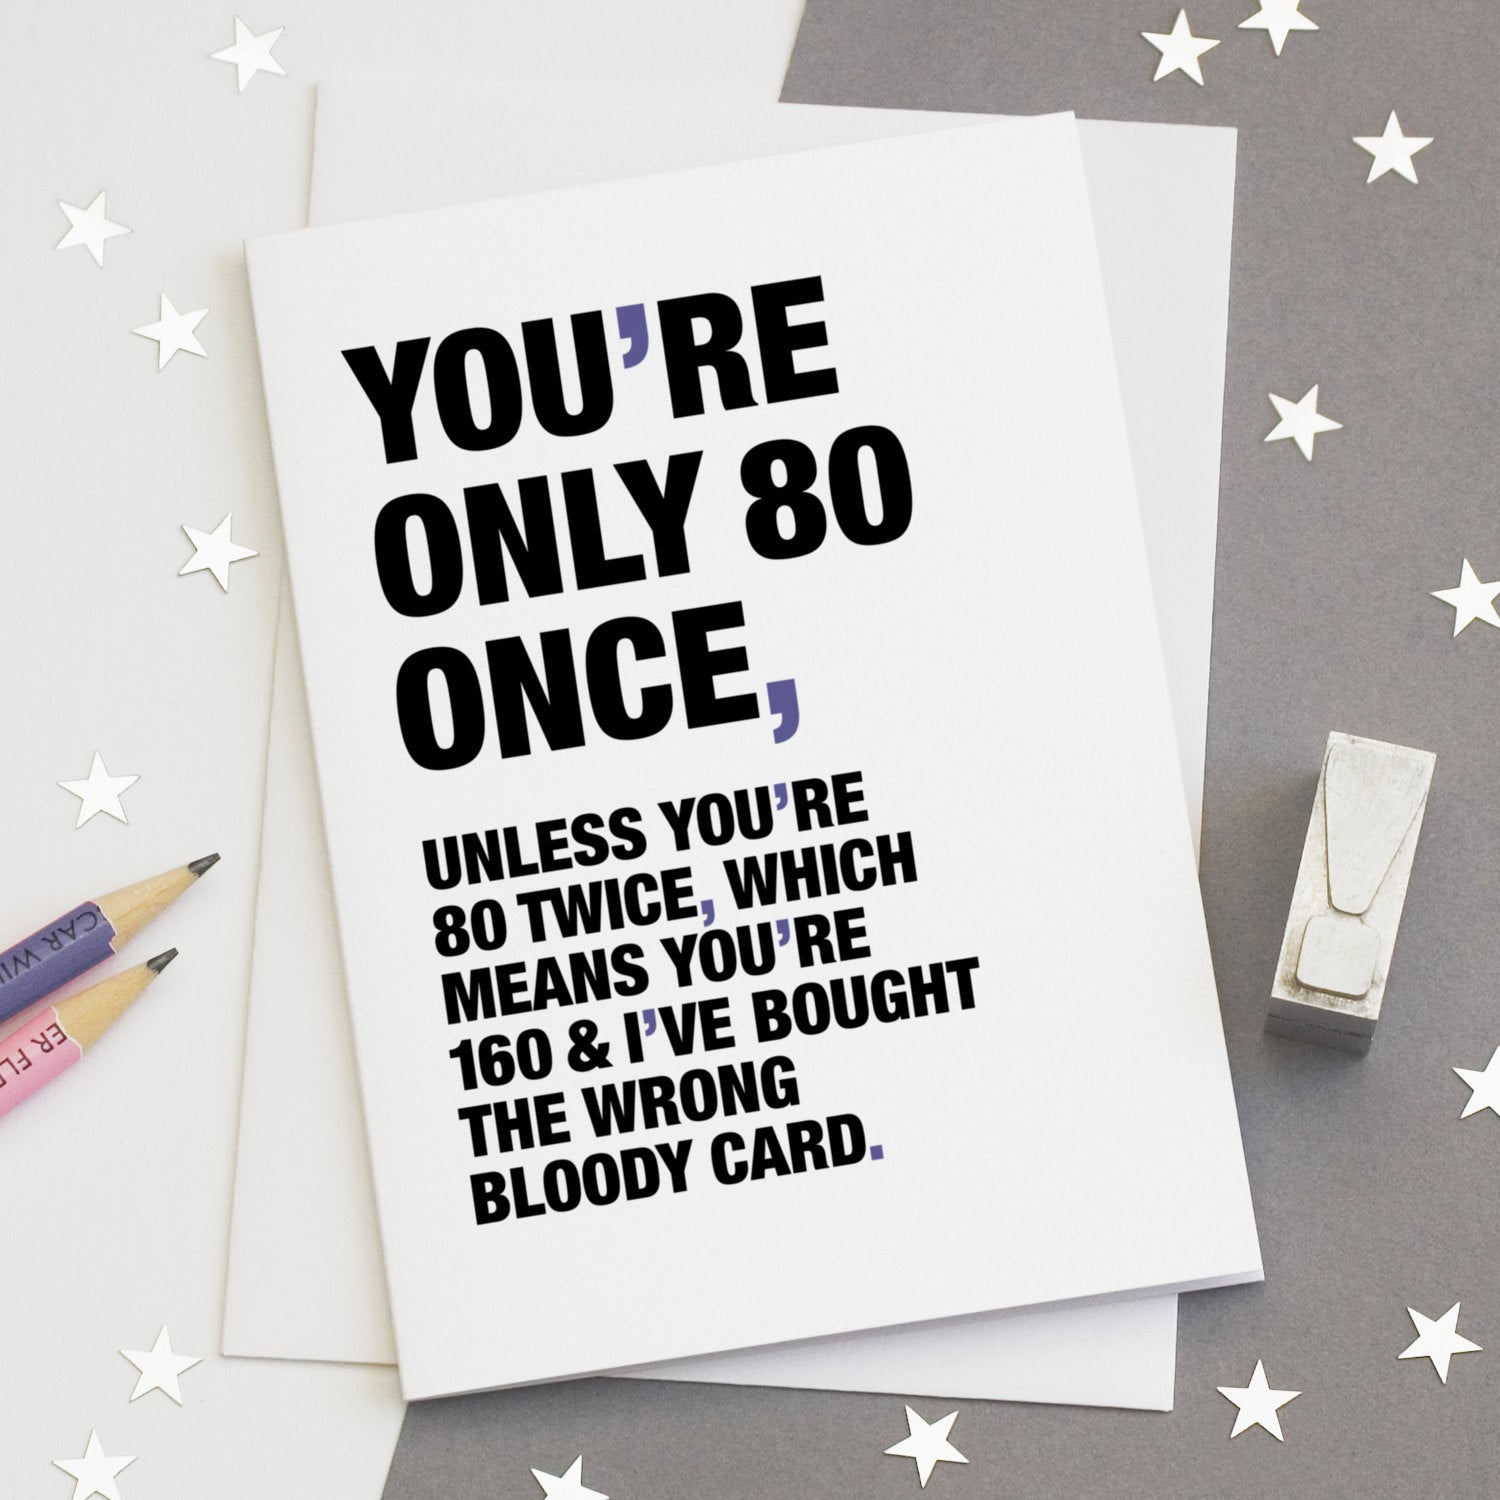 A funny birthday card saying 'you're only 80 once, unless you're 80 twice, which means you're 160 and I've bought the wrong bloody card'.